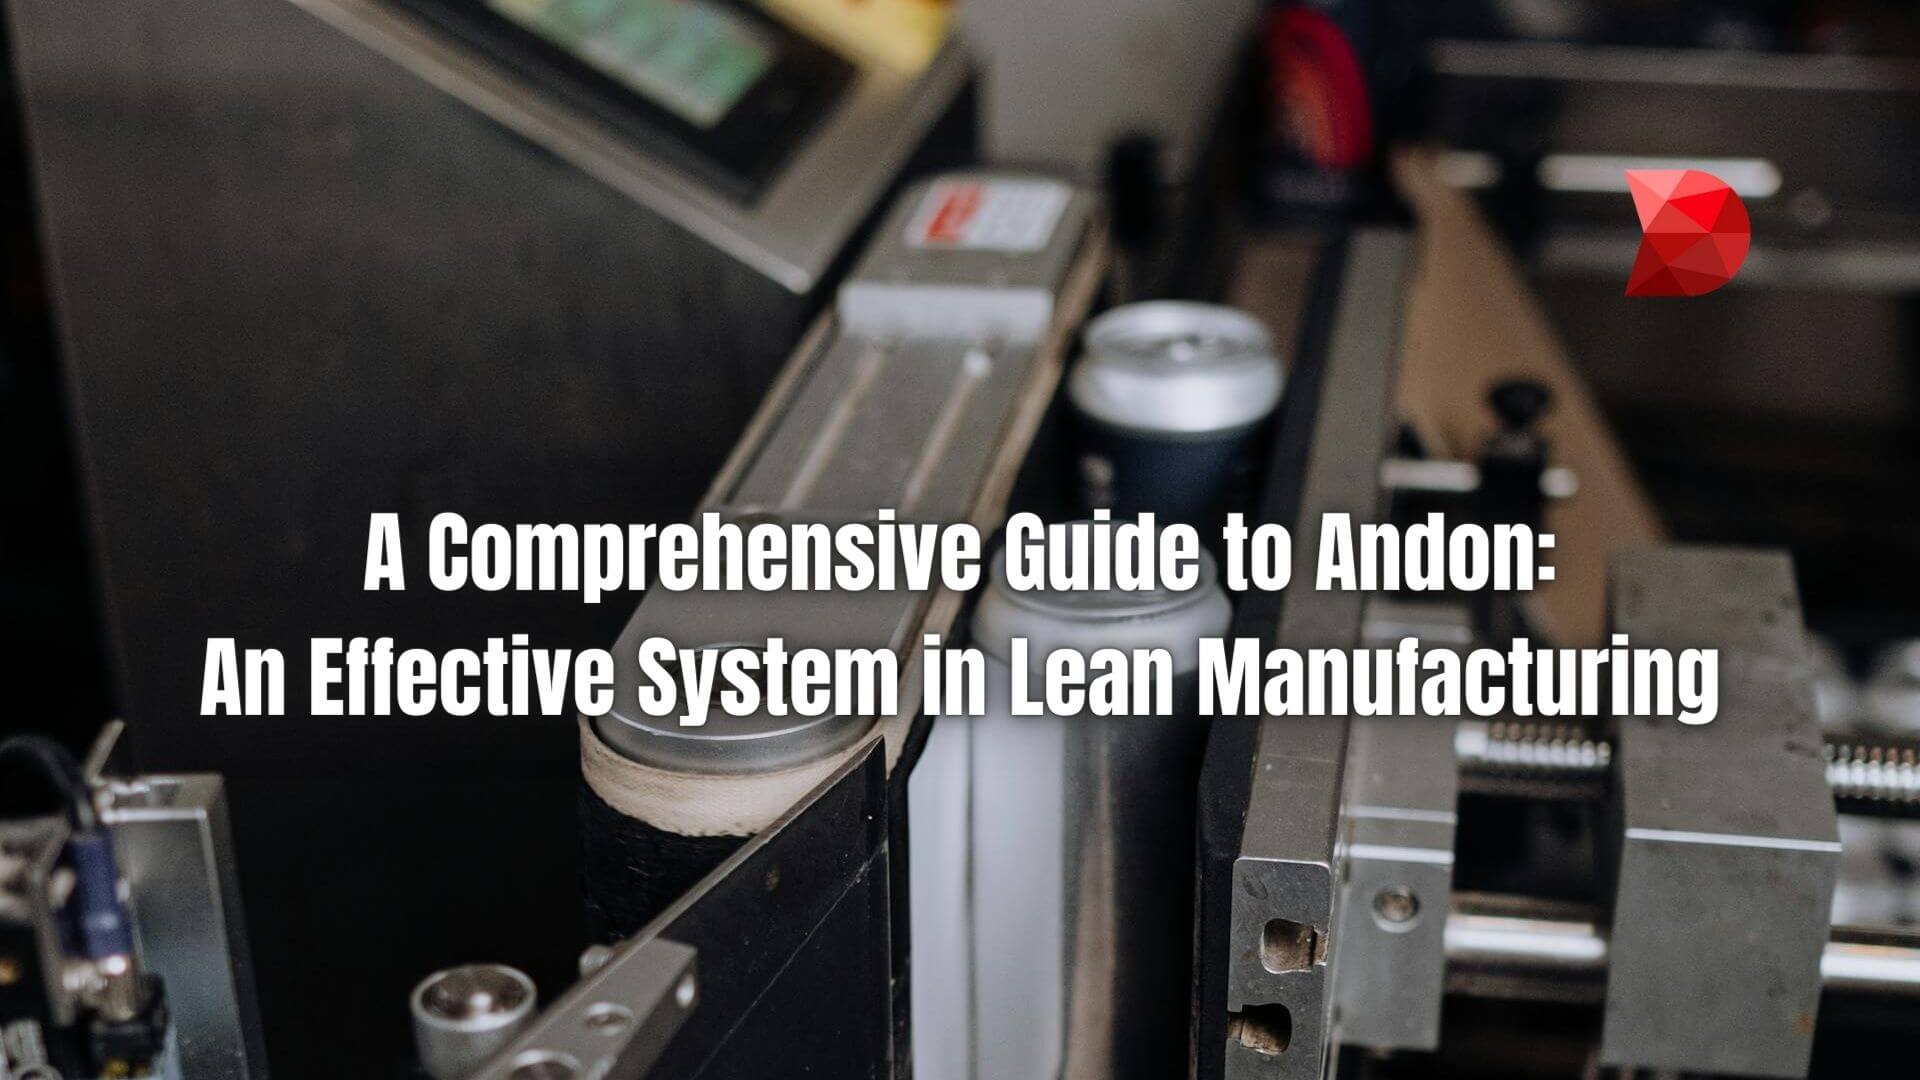 Boost productivity with this guide to Andon Lights in Lean Manufacturing. Click here to discover key strategies for a flawless operation.